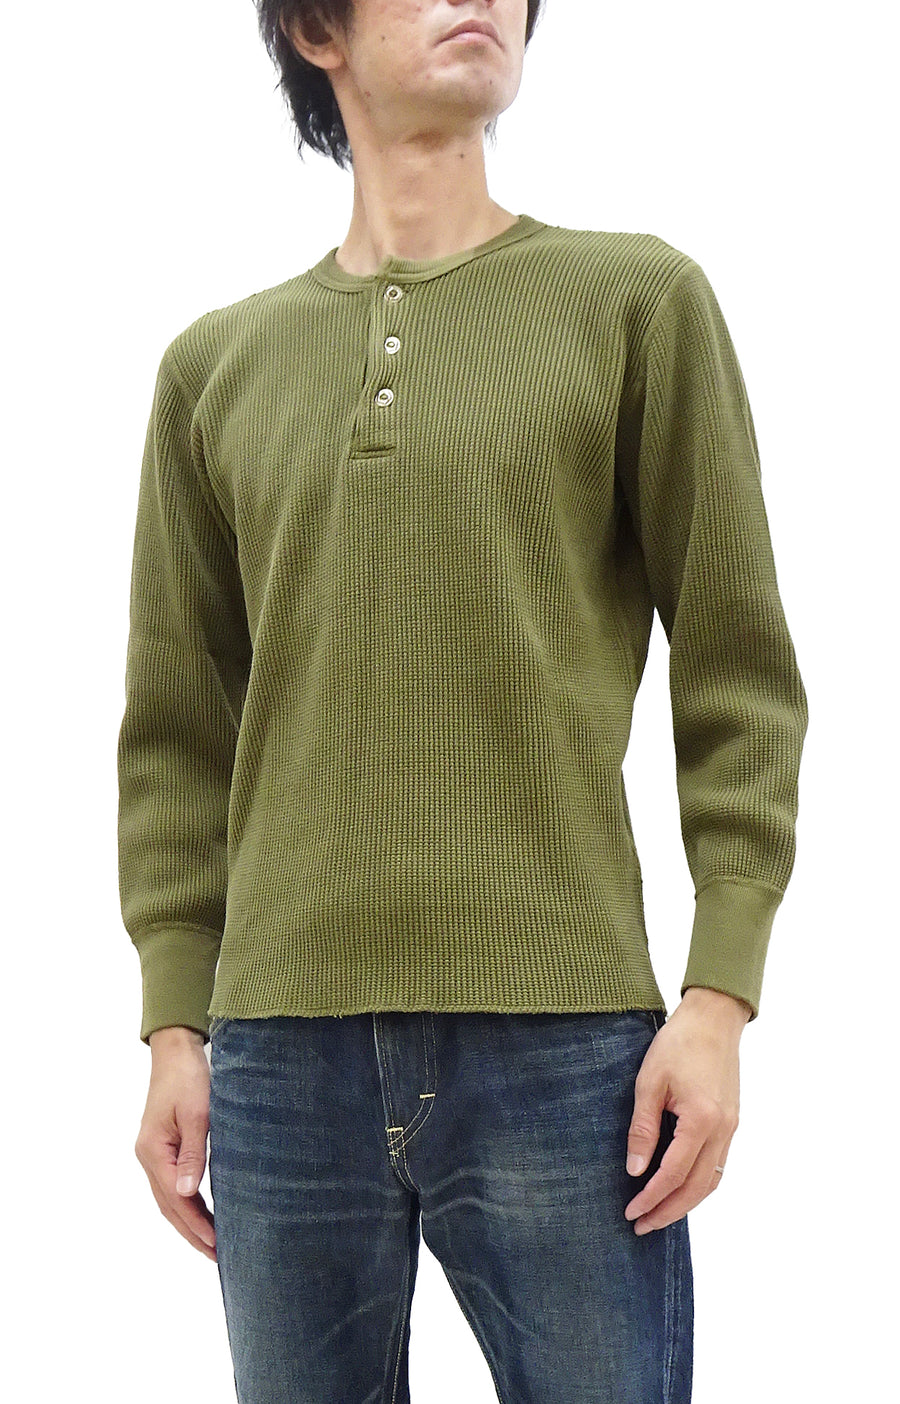 Mens Waffle Knit Thermal Long Sleeve T-shirt 3 Button Crew Neck